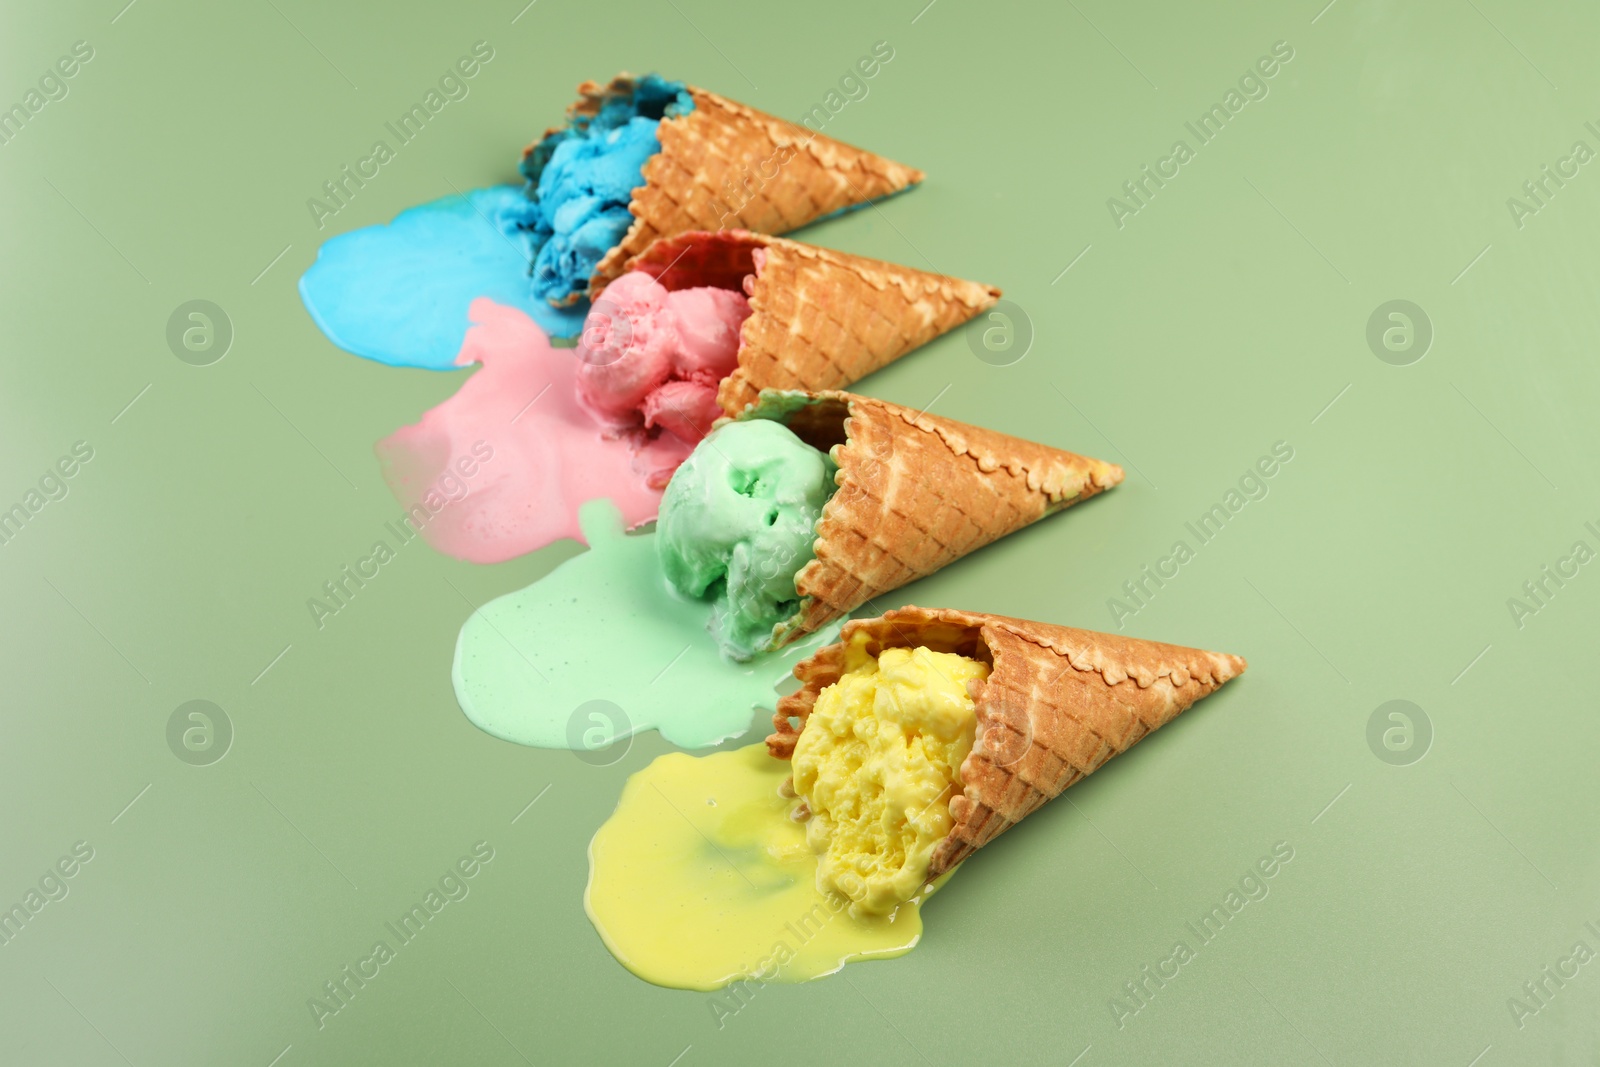 Photo of Melted ice cream in wafer cones on pale green background